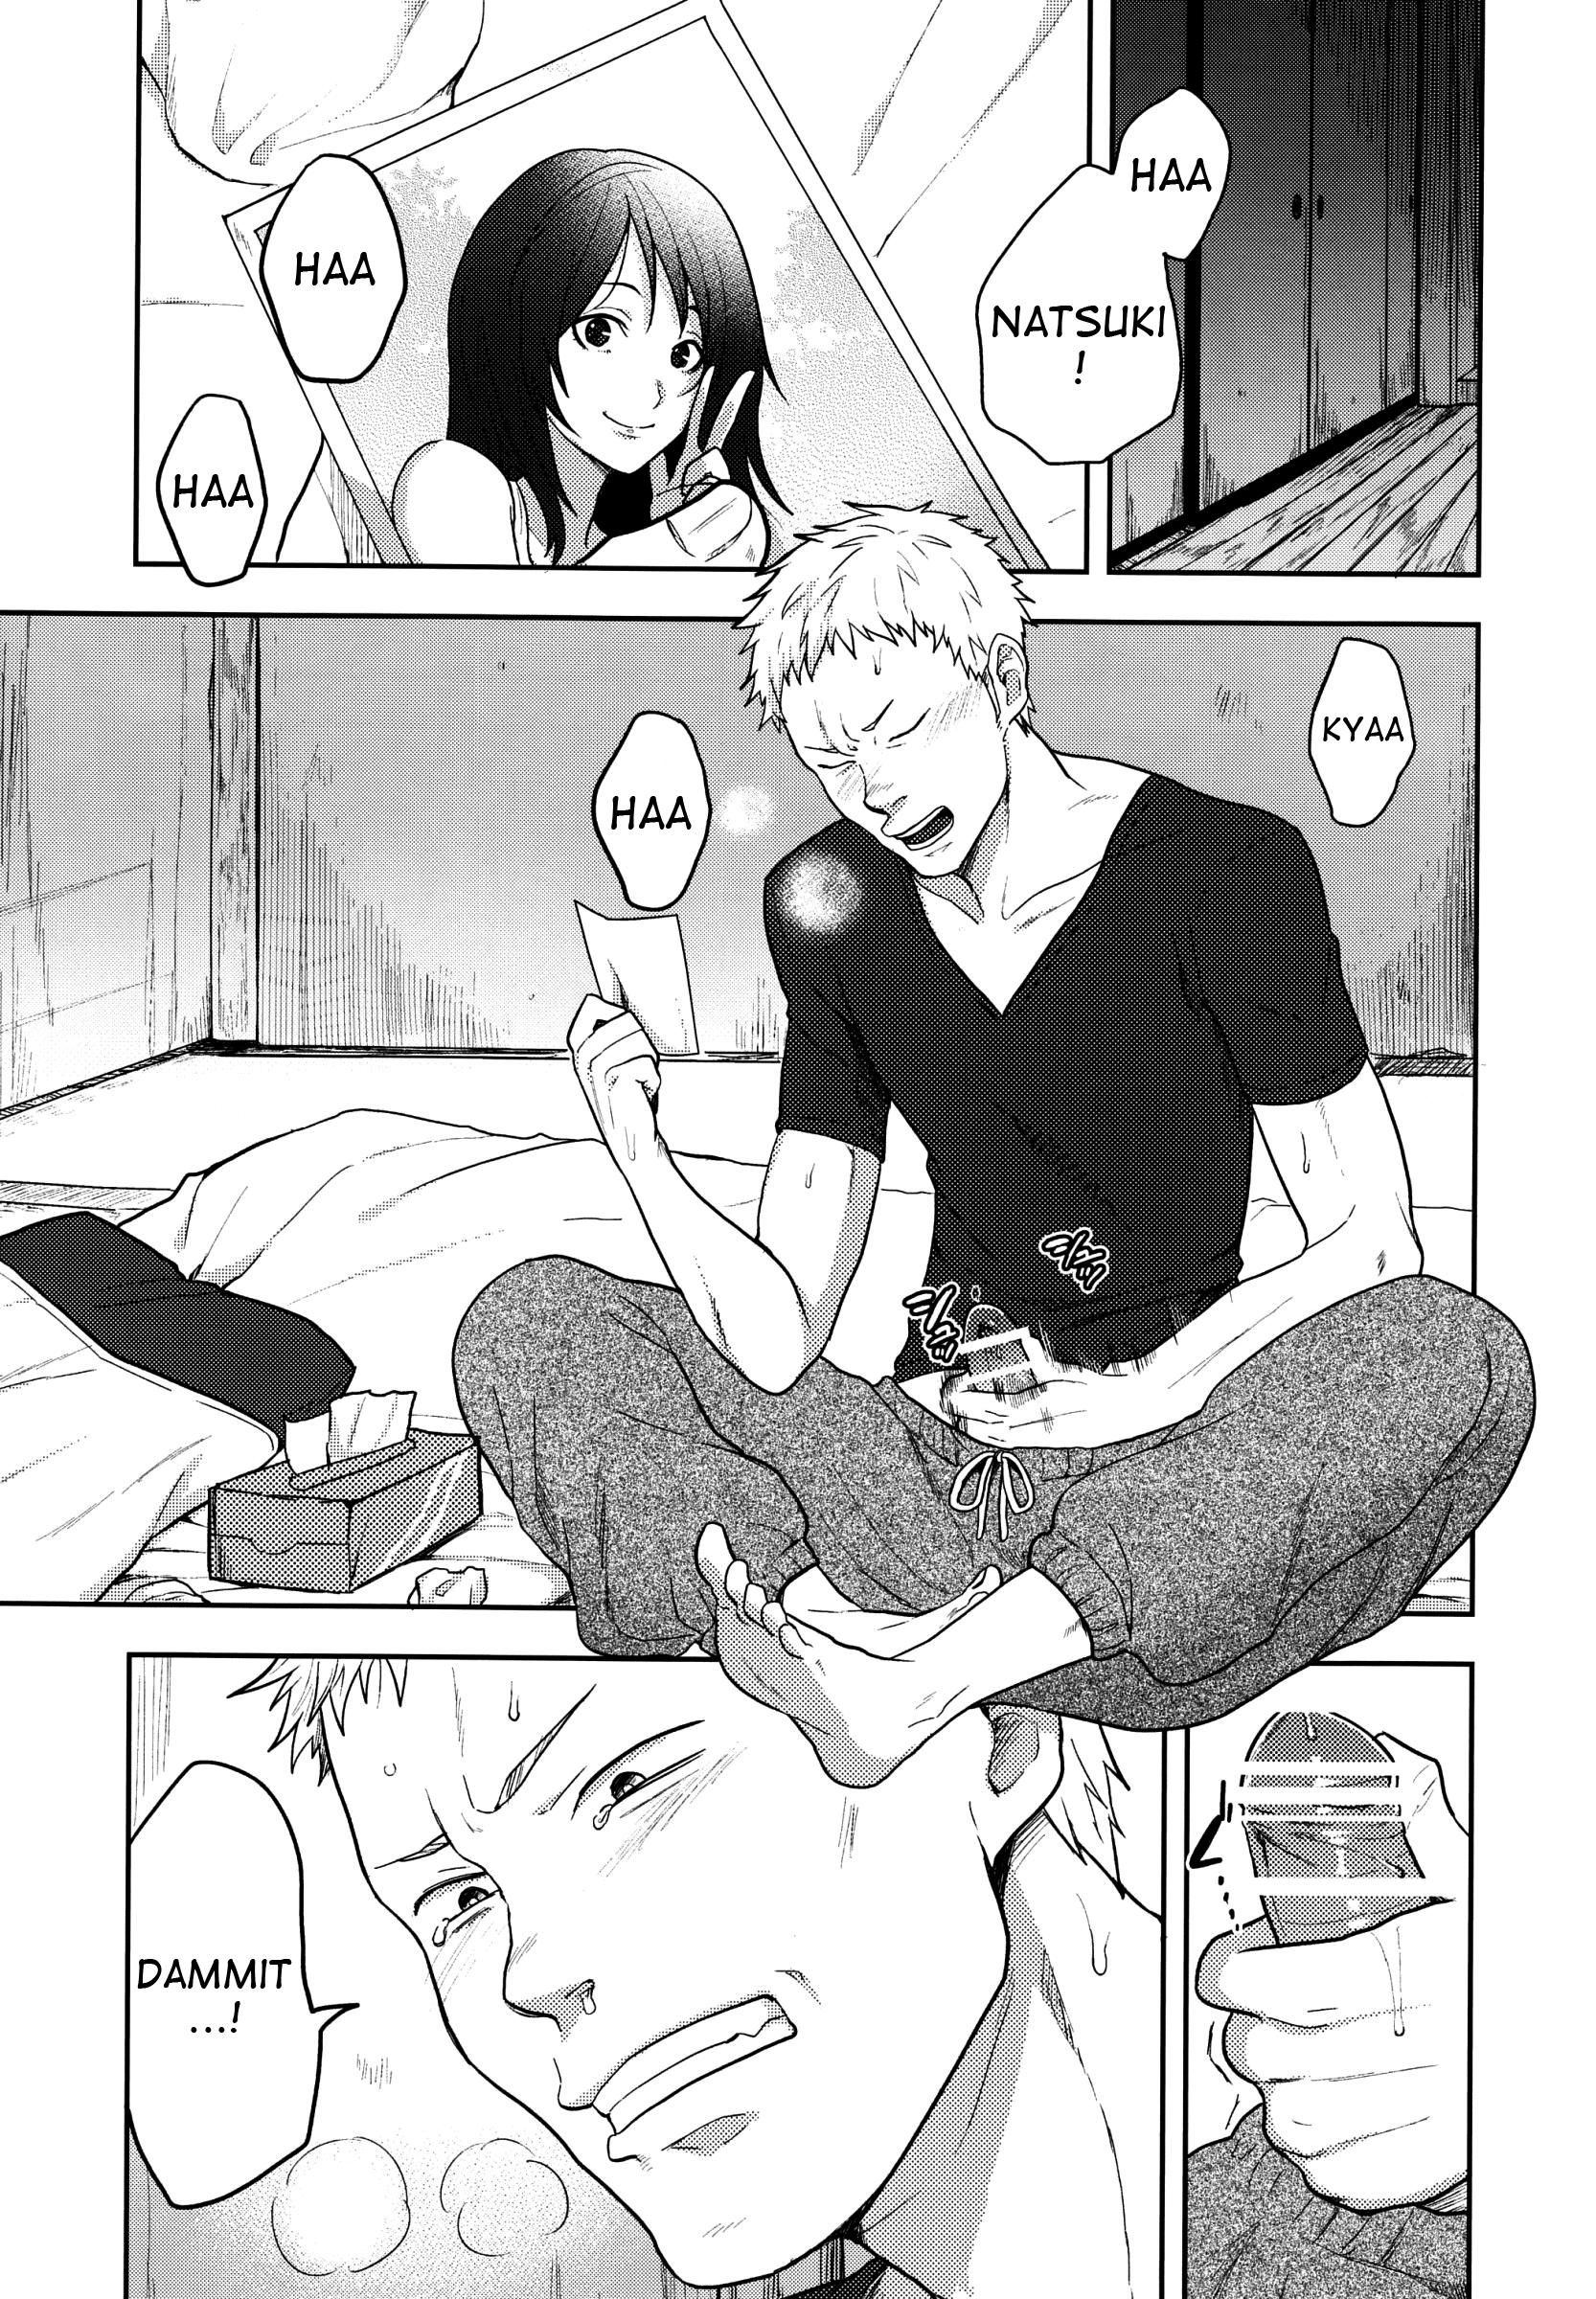 Teenage Porn DKY - Summer wars Grandpa - Page 3